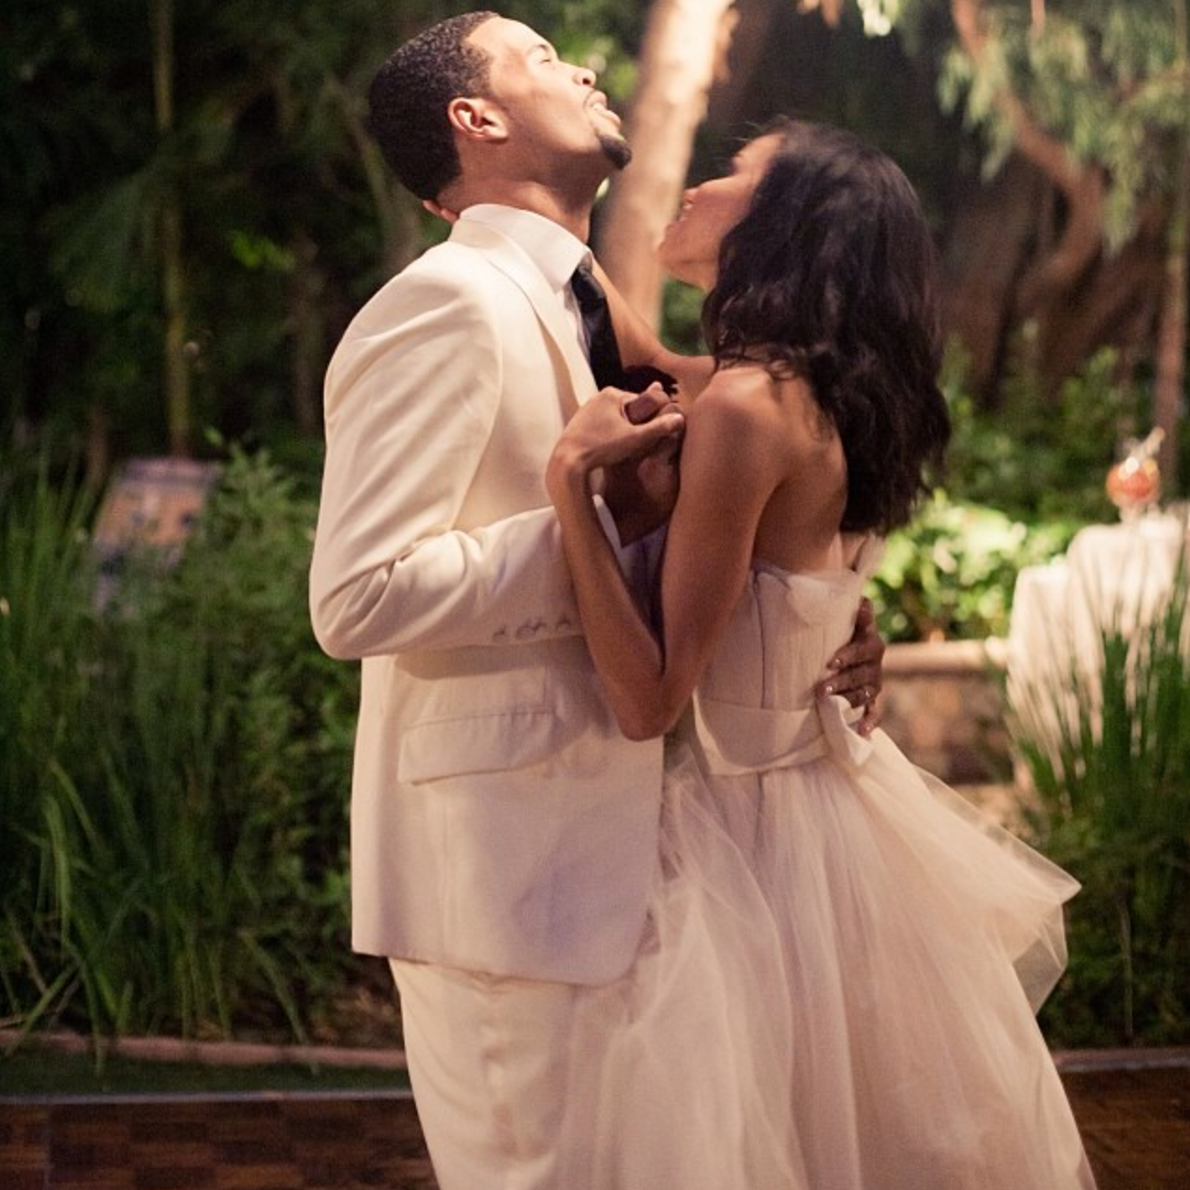 7 Super Cute Moments In Jurnee Smollett-Bell And Her Husband Josiah's Marriage
